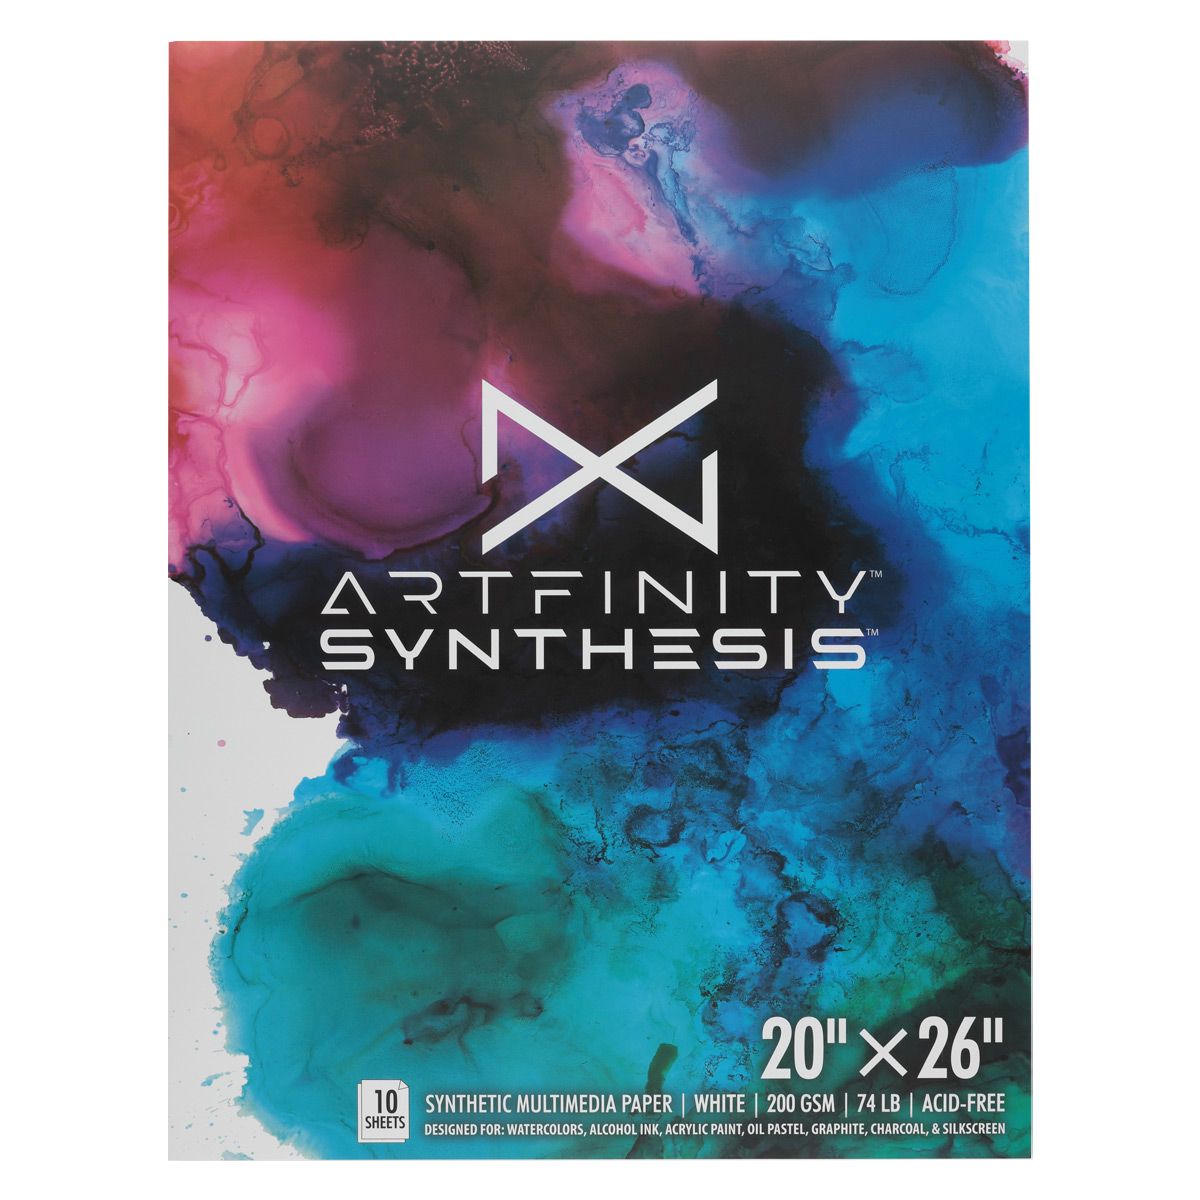 Artfinity Synthesis Multimedia Watercolor Paper Pad, 20x26", 10 Sheets